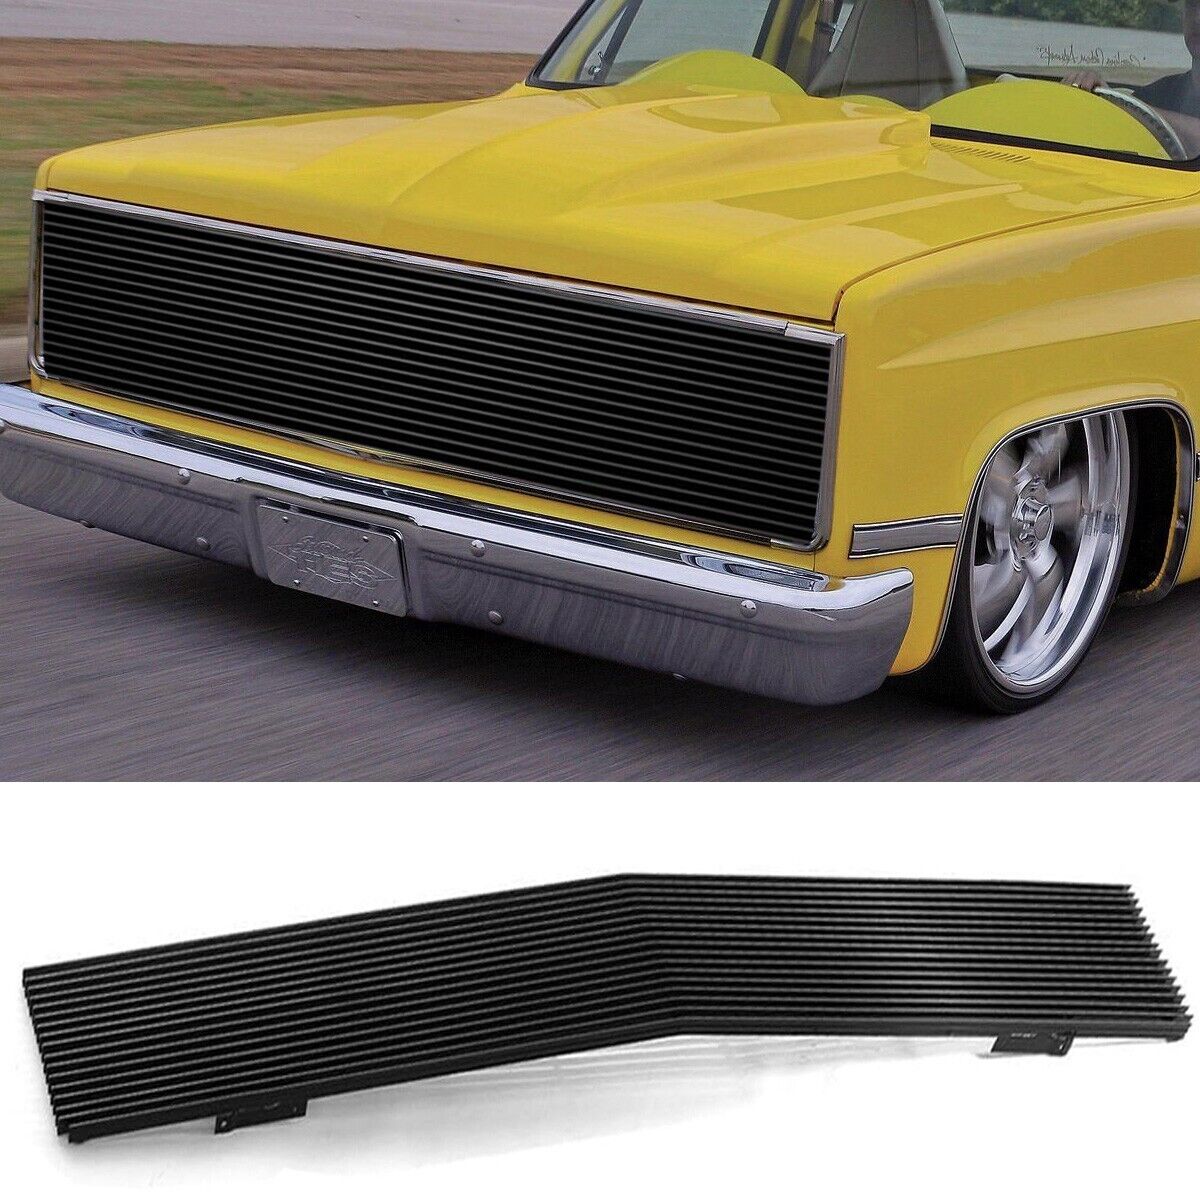 Billet Grille For 81-87 Chevy GMC Pickup/Suburban/Blazer/Jimmy Front Black Grill